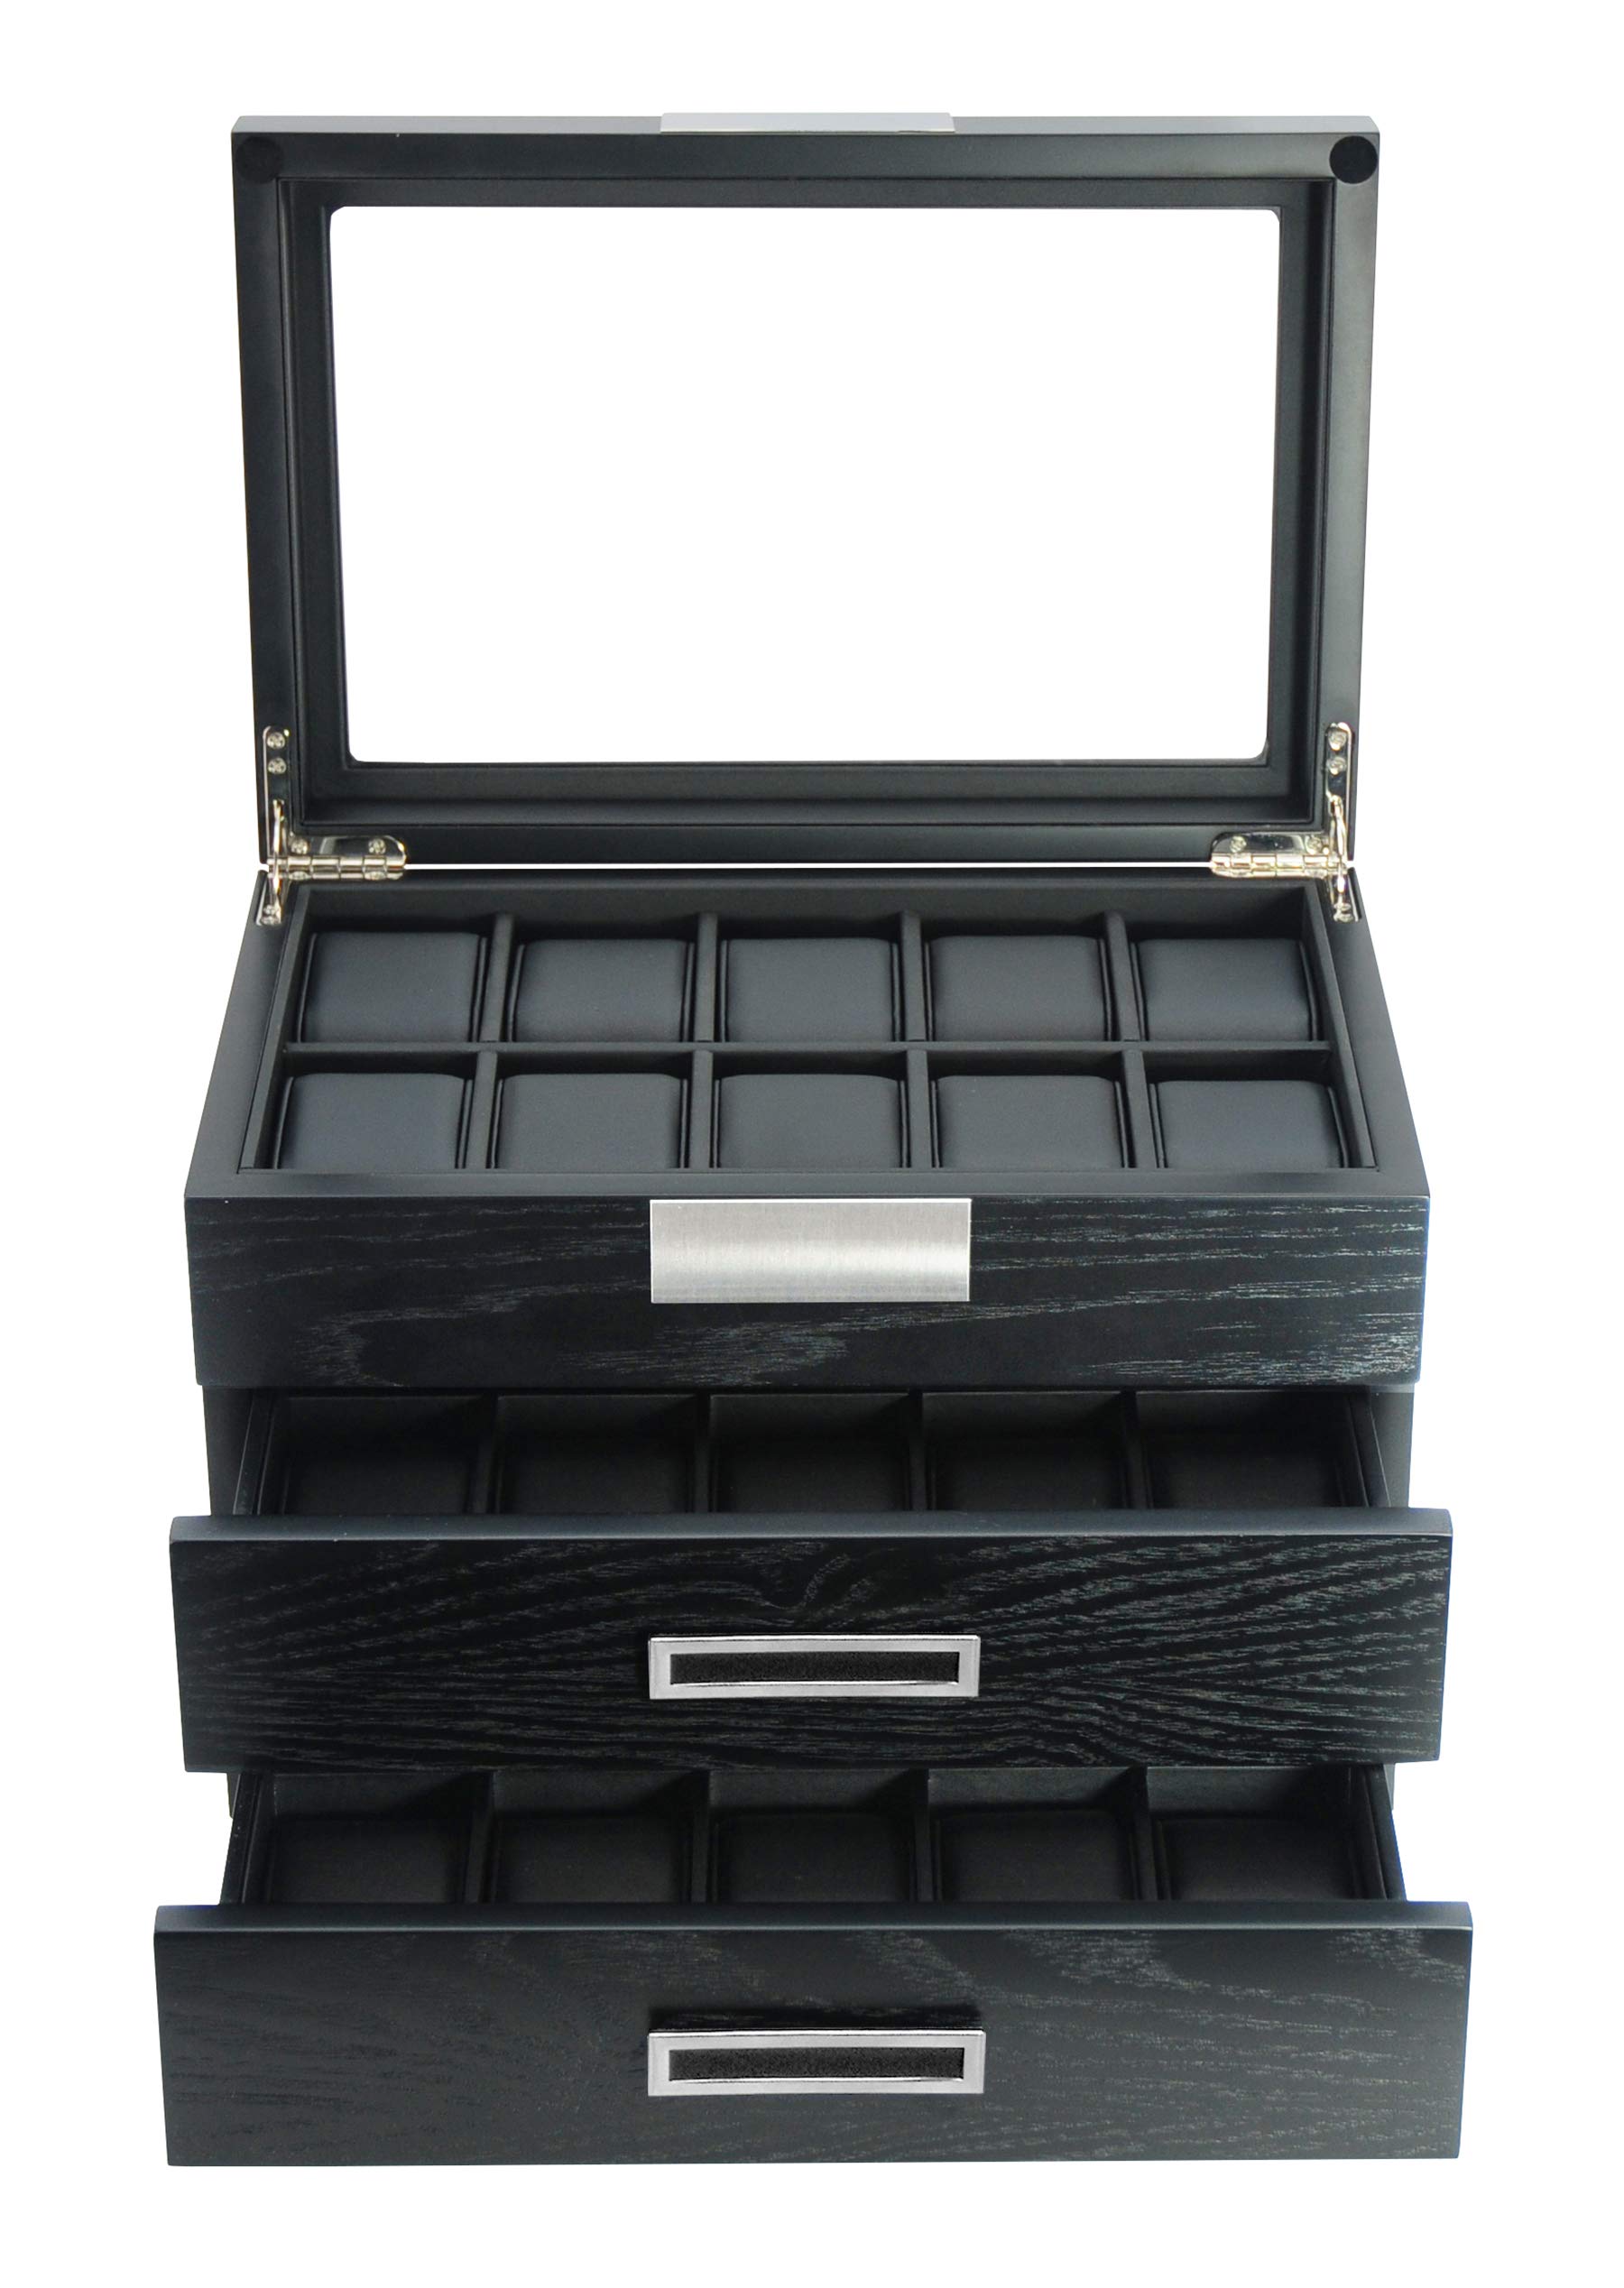 TIMELYBUYS 30 Black Ebony Wood Watch Extra Height Clearance Box Display Case 3 Level Storage Jewelry Organizer with Glass Top, Stainless Steel Accents, and 2 Drawers